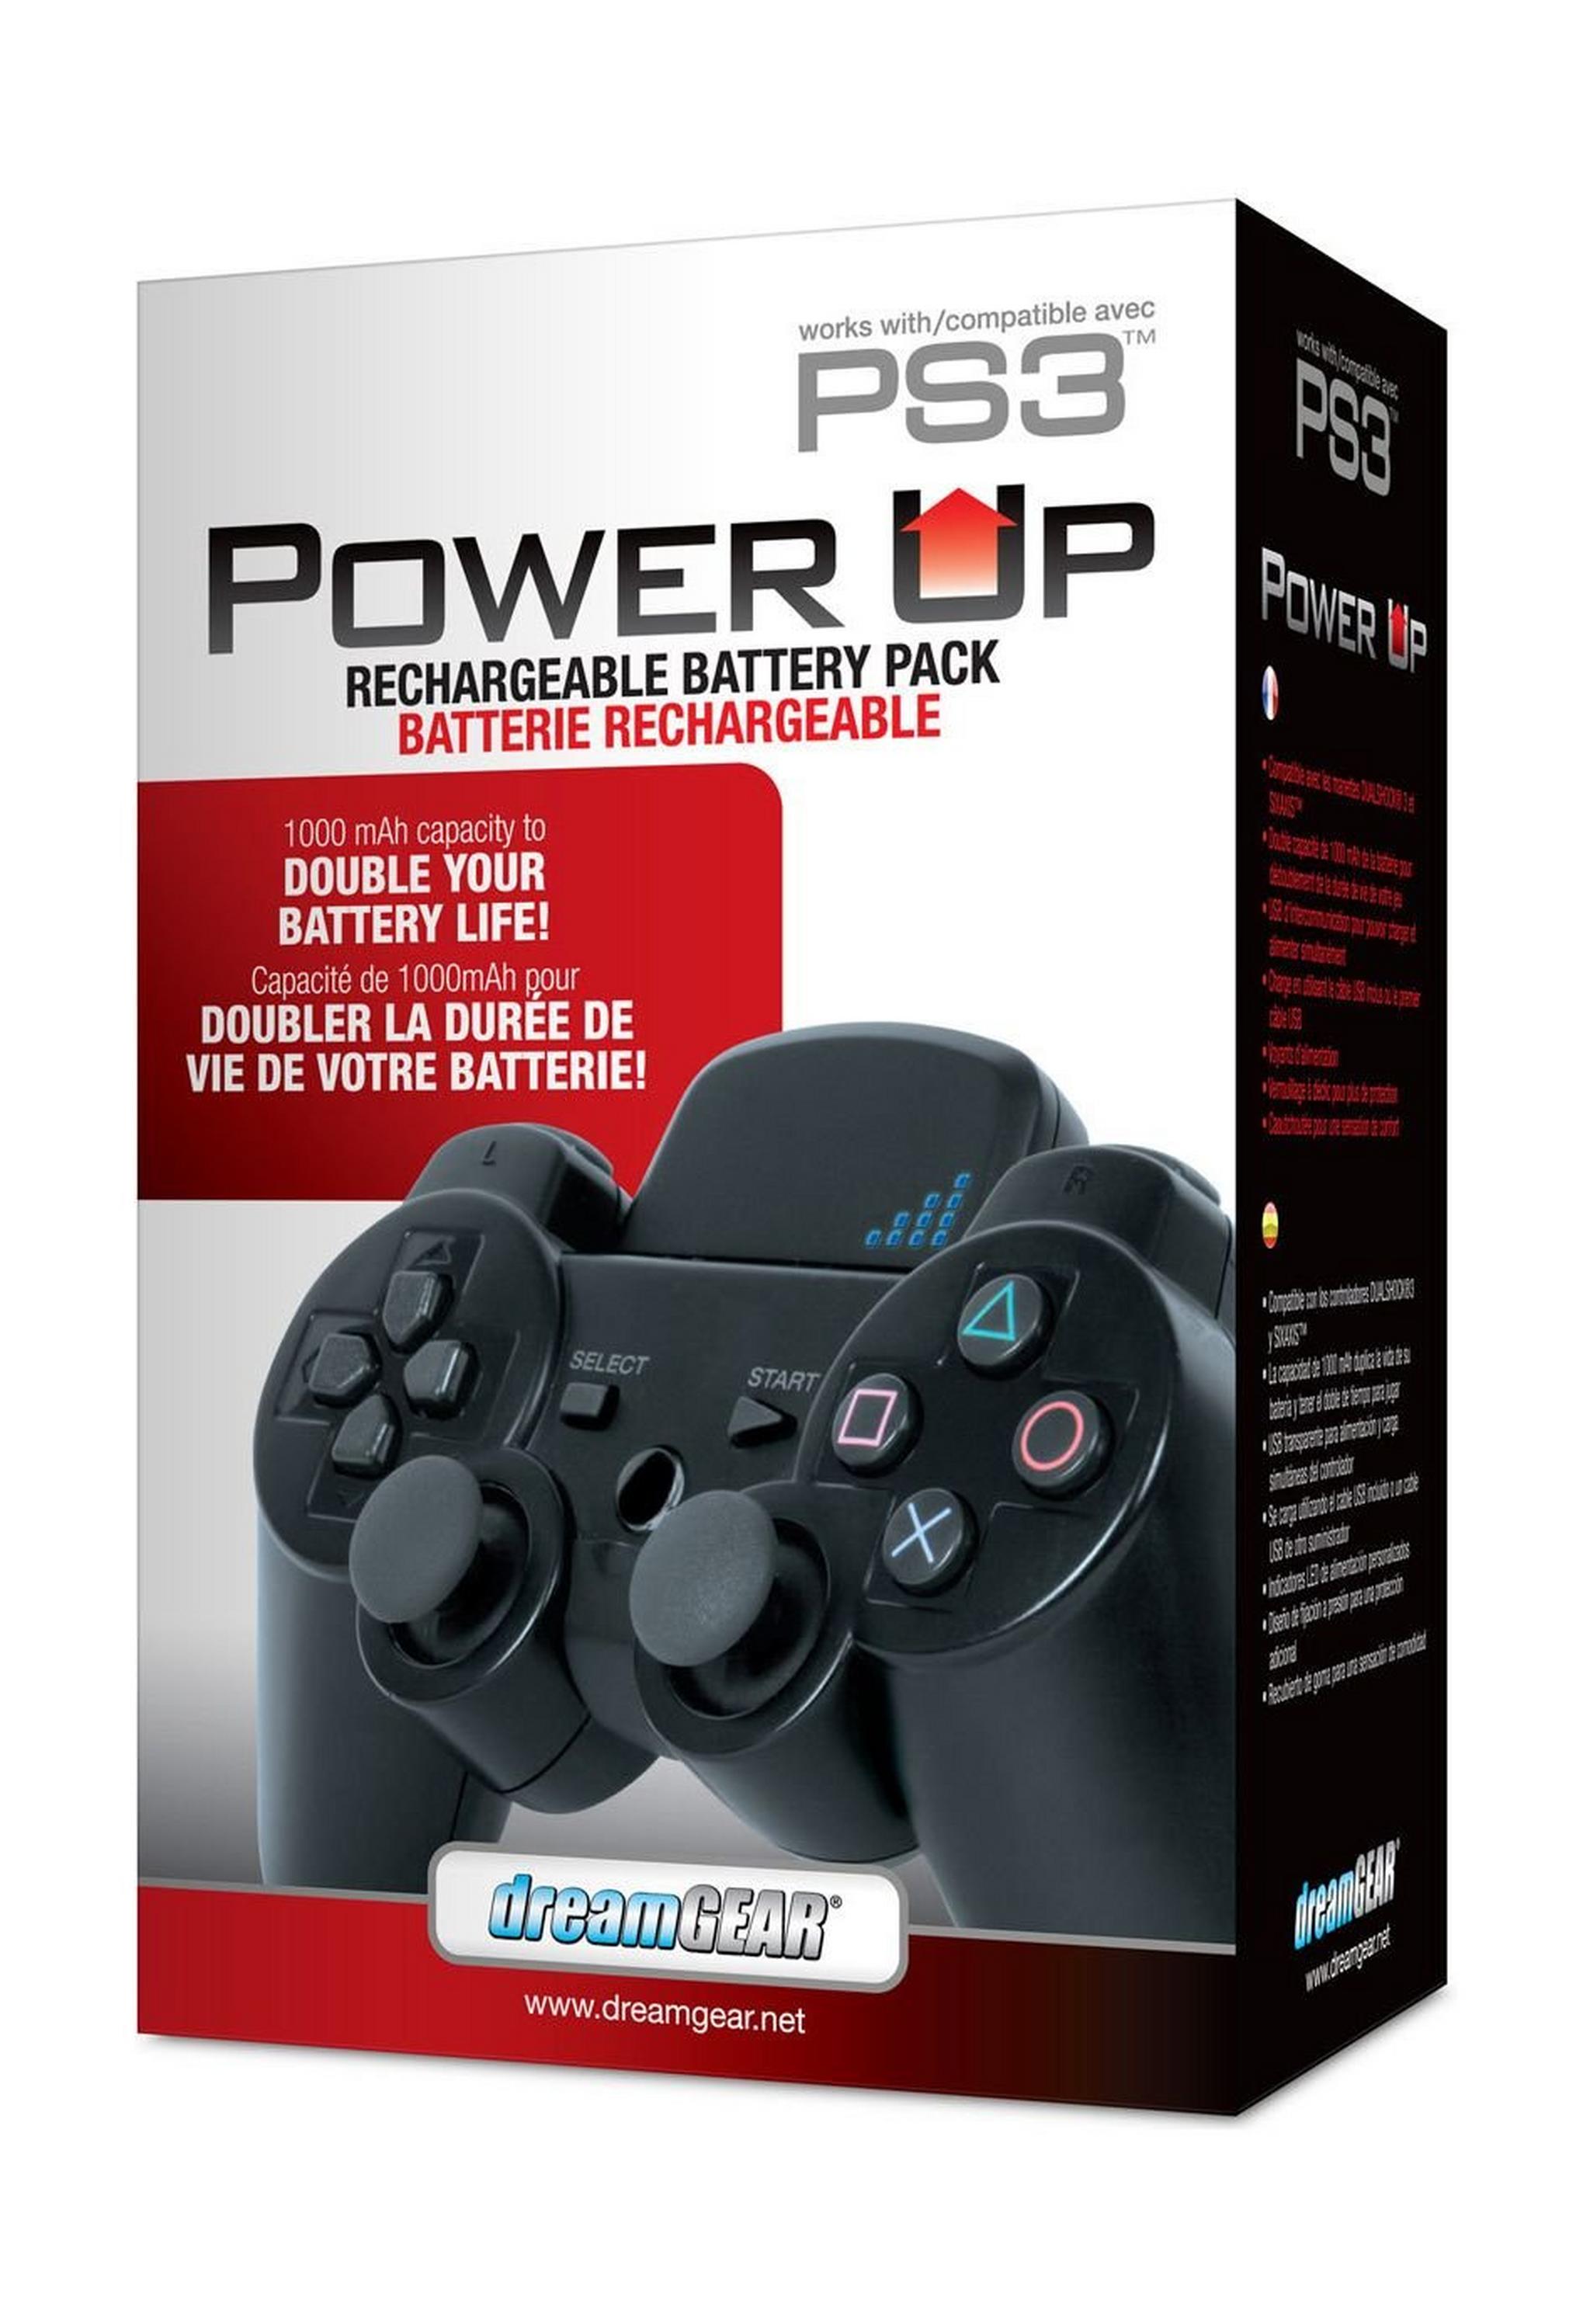 Dream Gear Power Up Rechargeable Battery Pack for PS3 (DGPS3-3812)